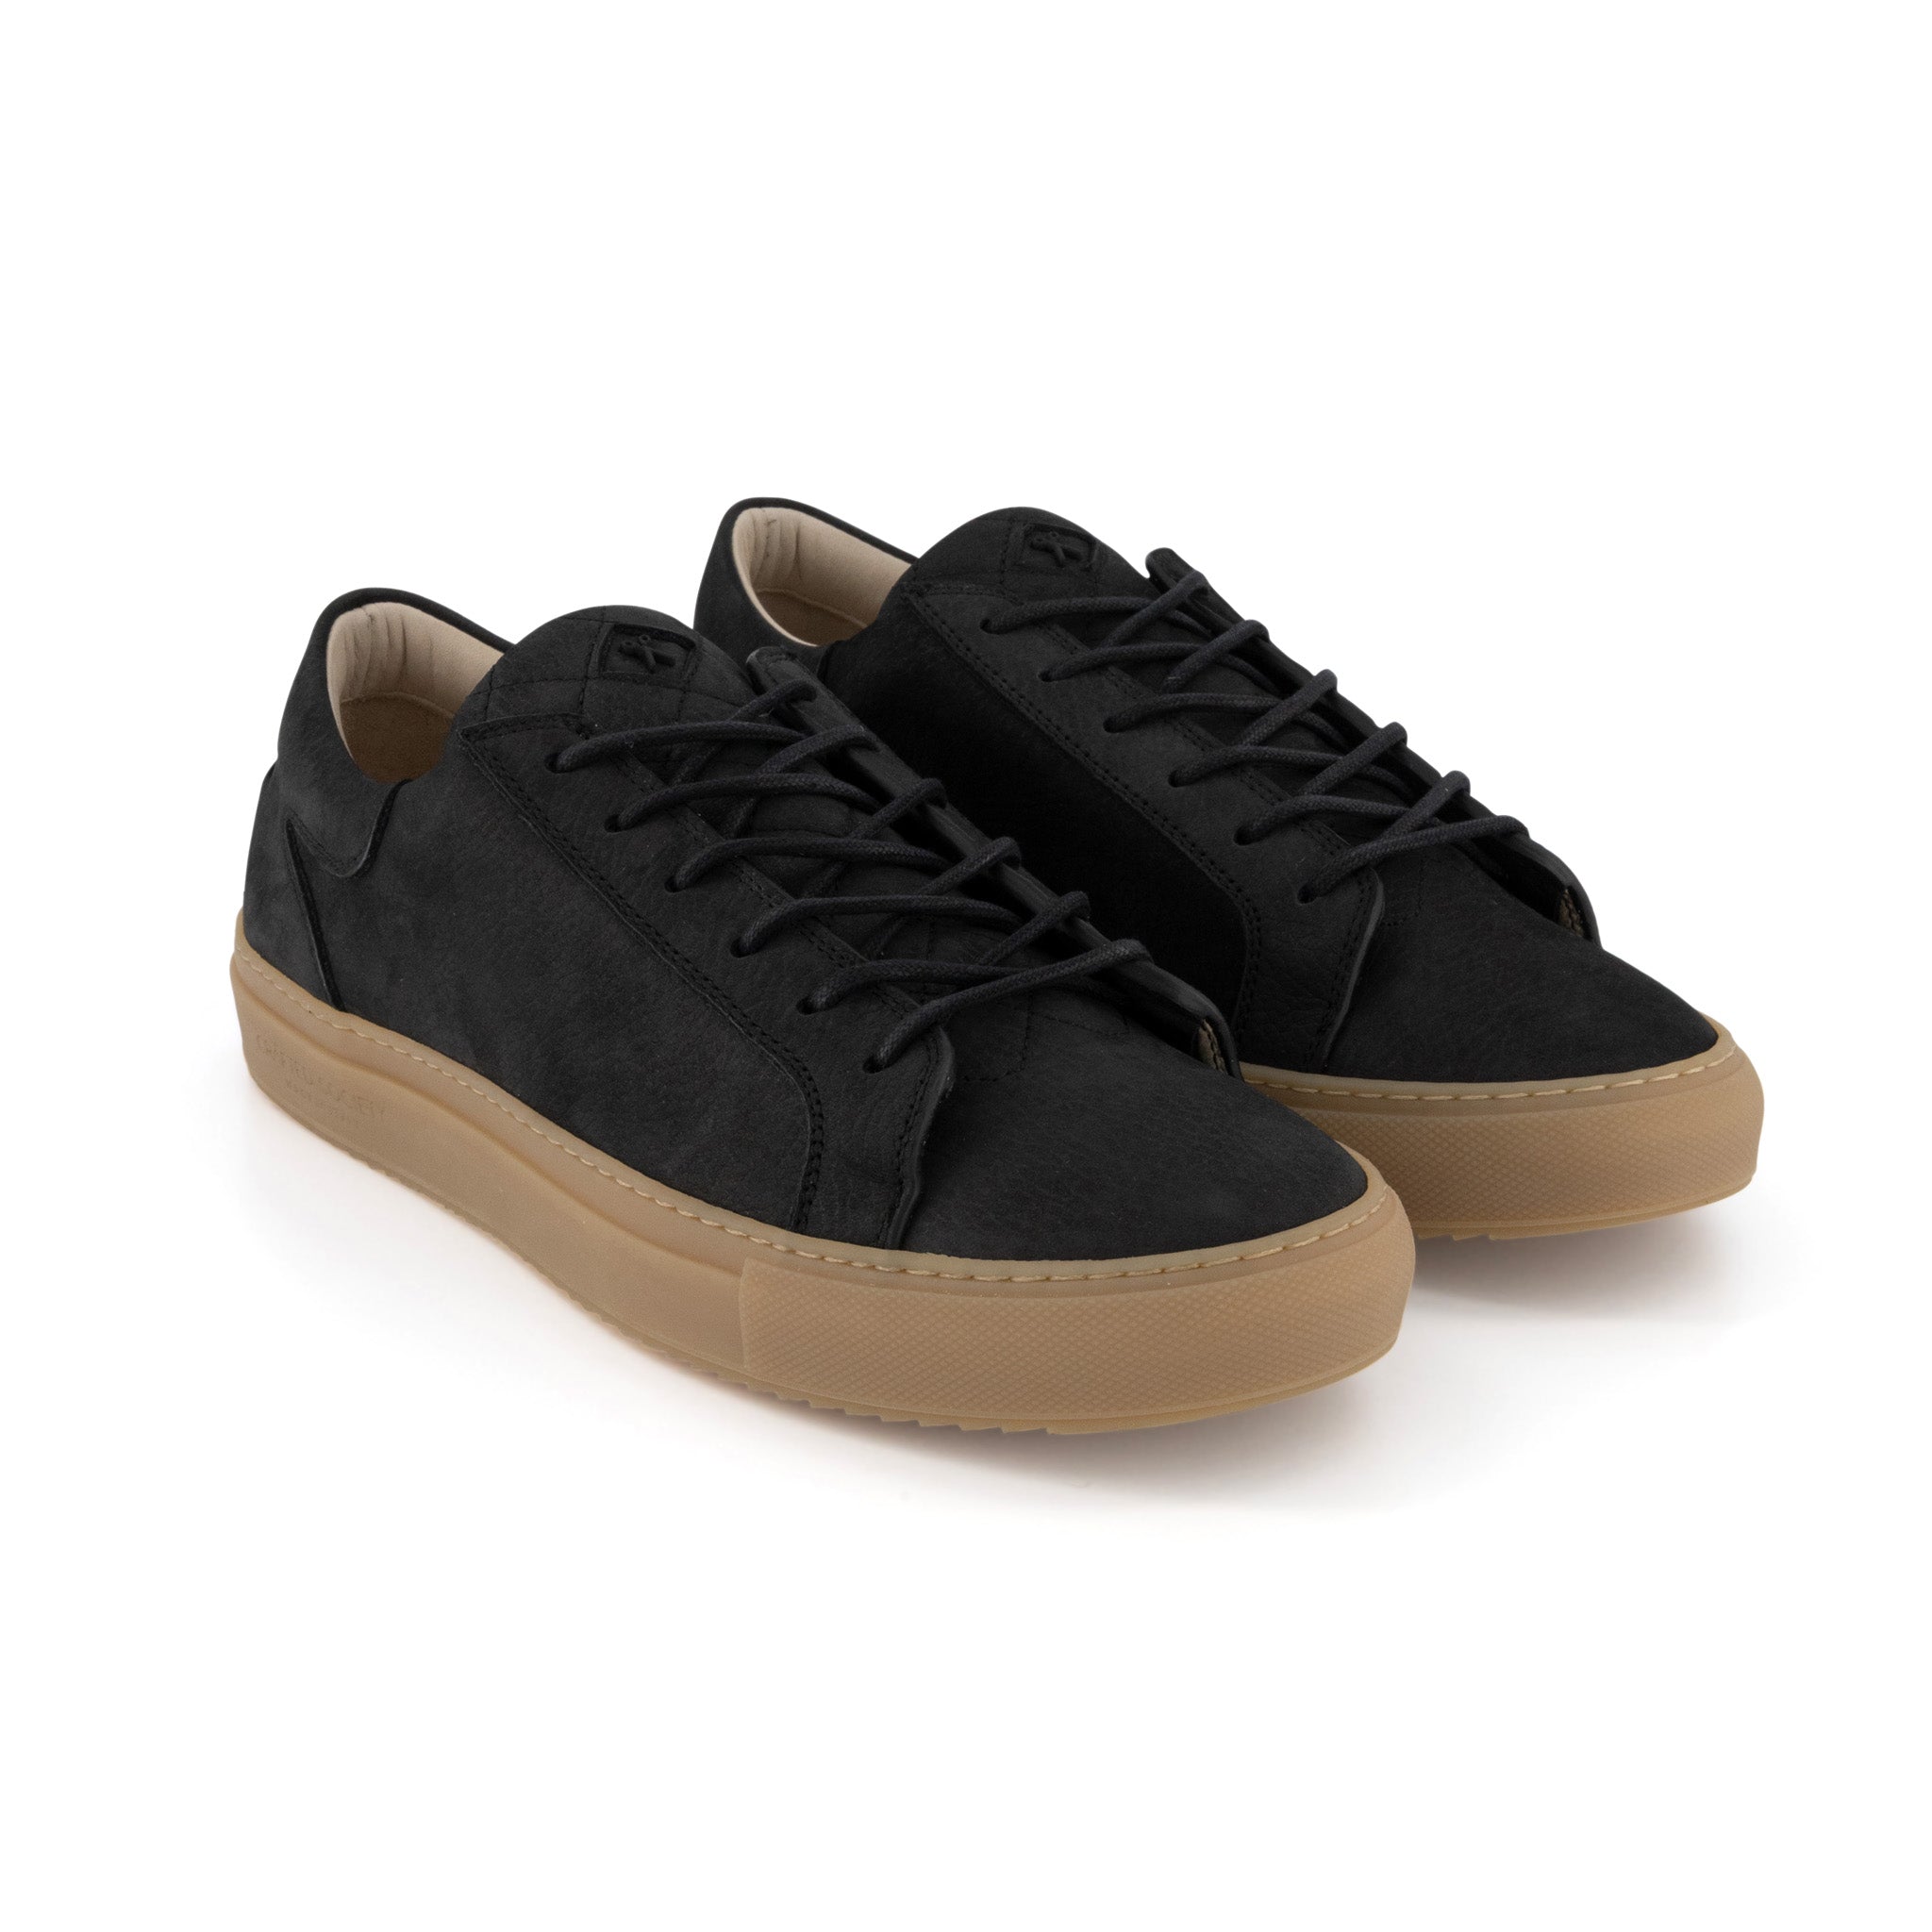 Mario Low Refined Sneaker | Black Nubuck | Gum Rubber Outsole | Made in Italy